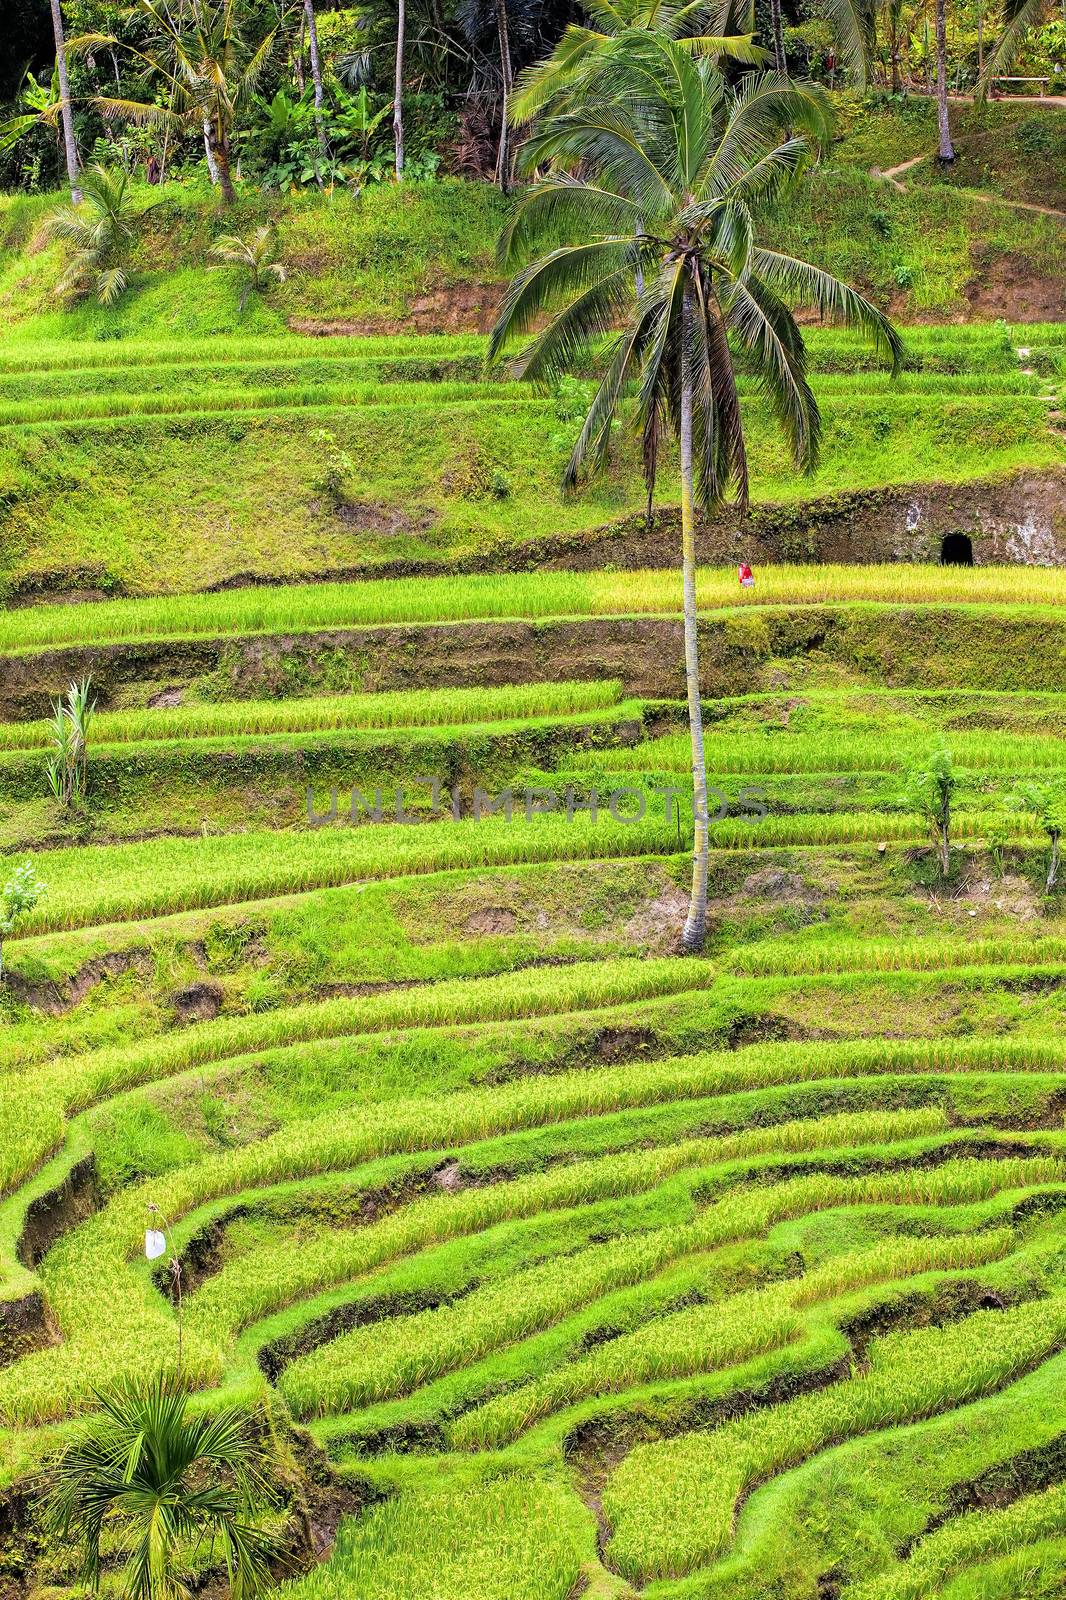 Tegalalang rice terrace fields in Bali Indonesia